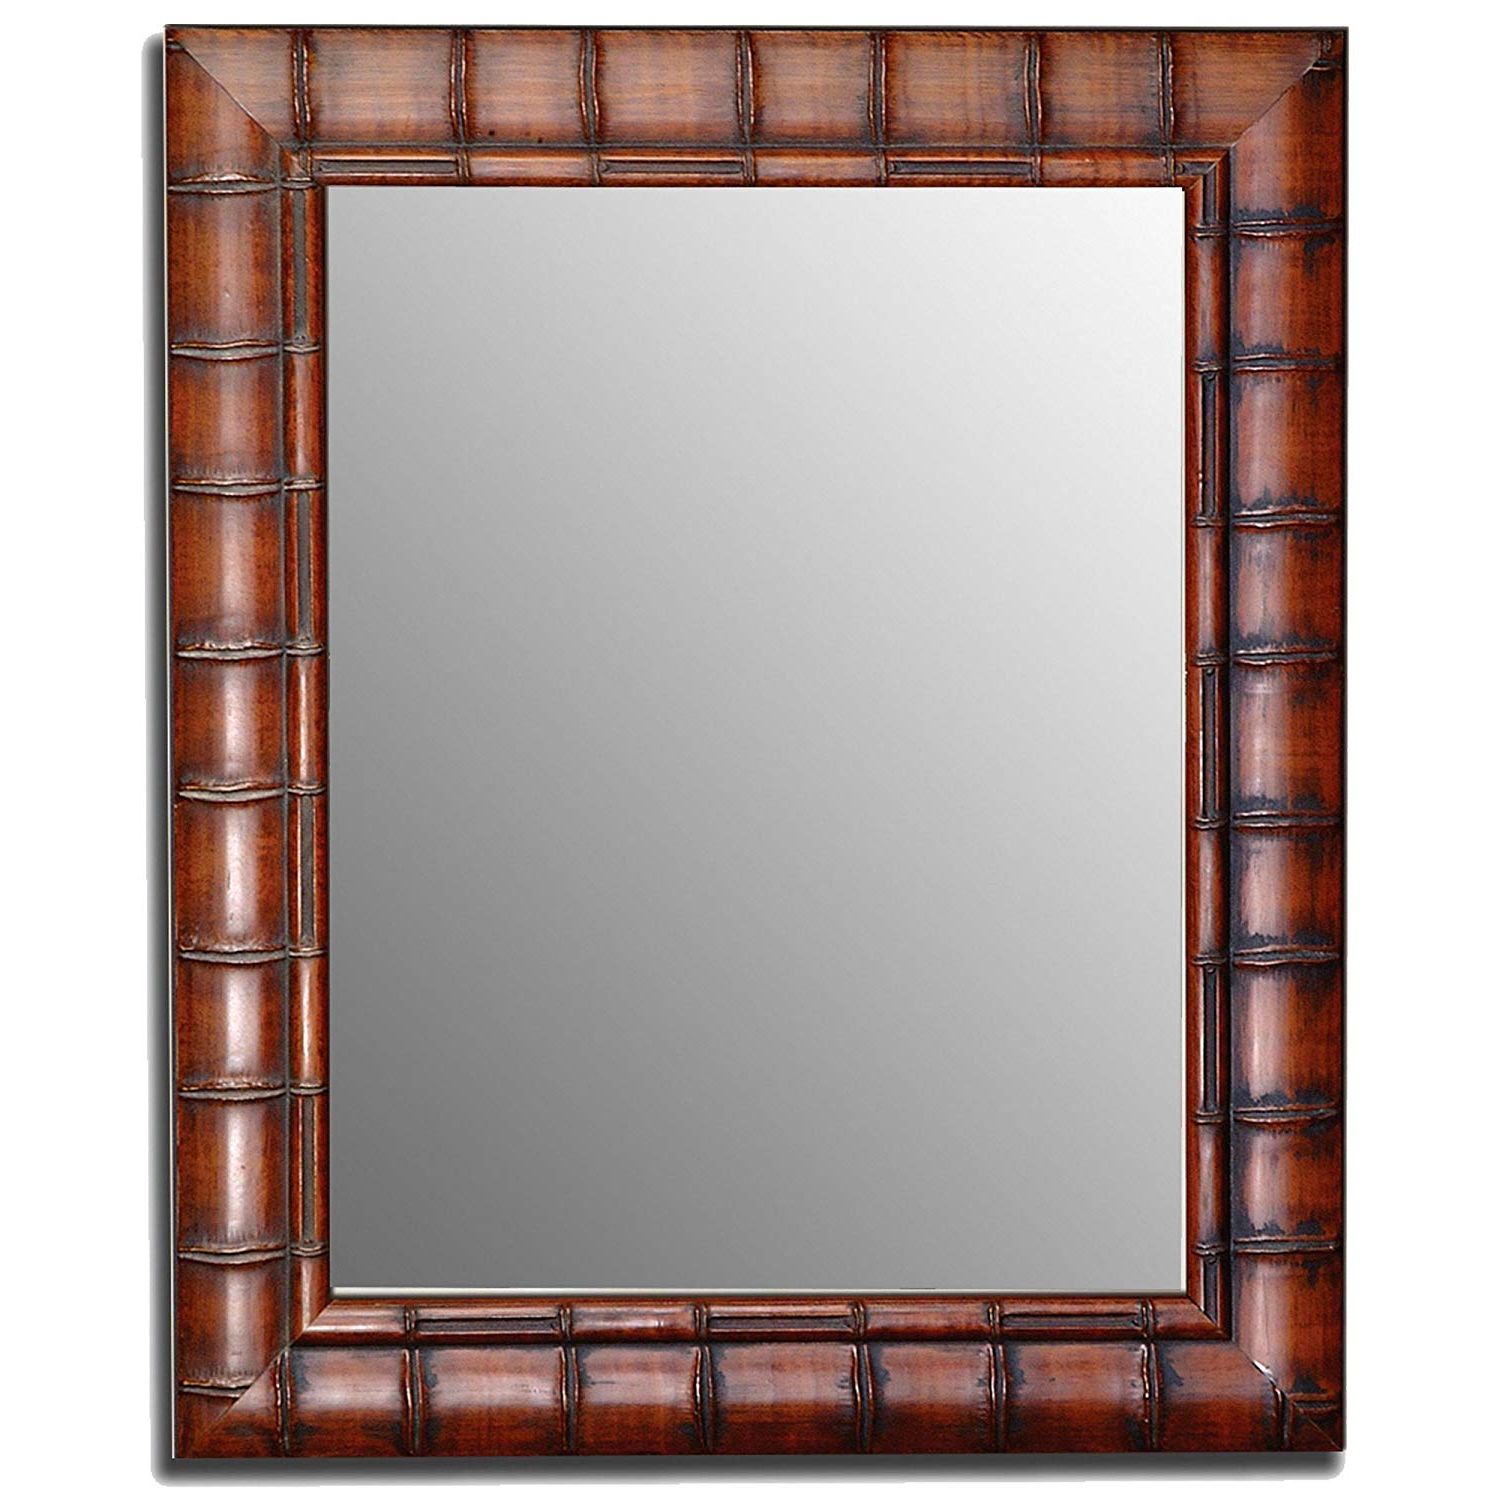 Bamboo Framed Wall Mirrors With Latest Amazon: Bamboo Framed Wall Mirror: Home & Kitchen (View 1 of 20)